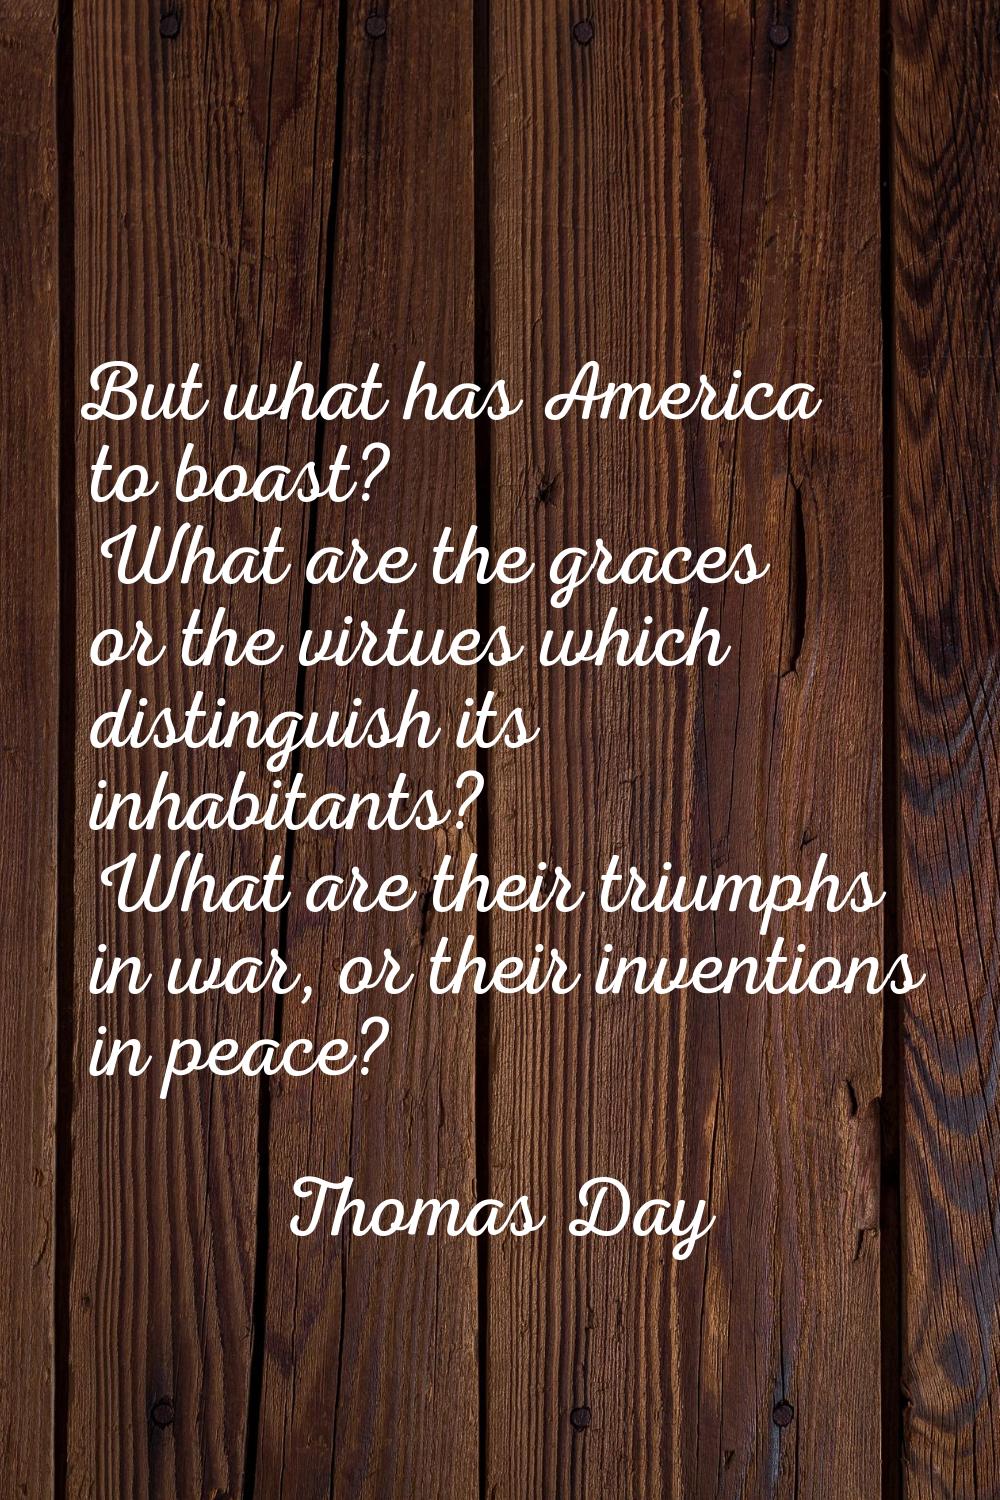 But what has America to boast? What are the graces or the virtues which distinguish its inhabitants